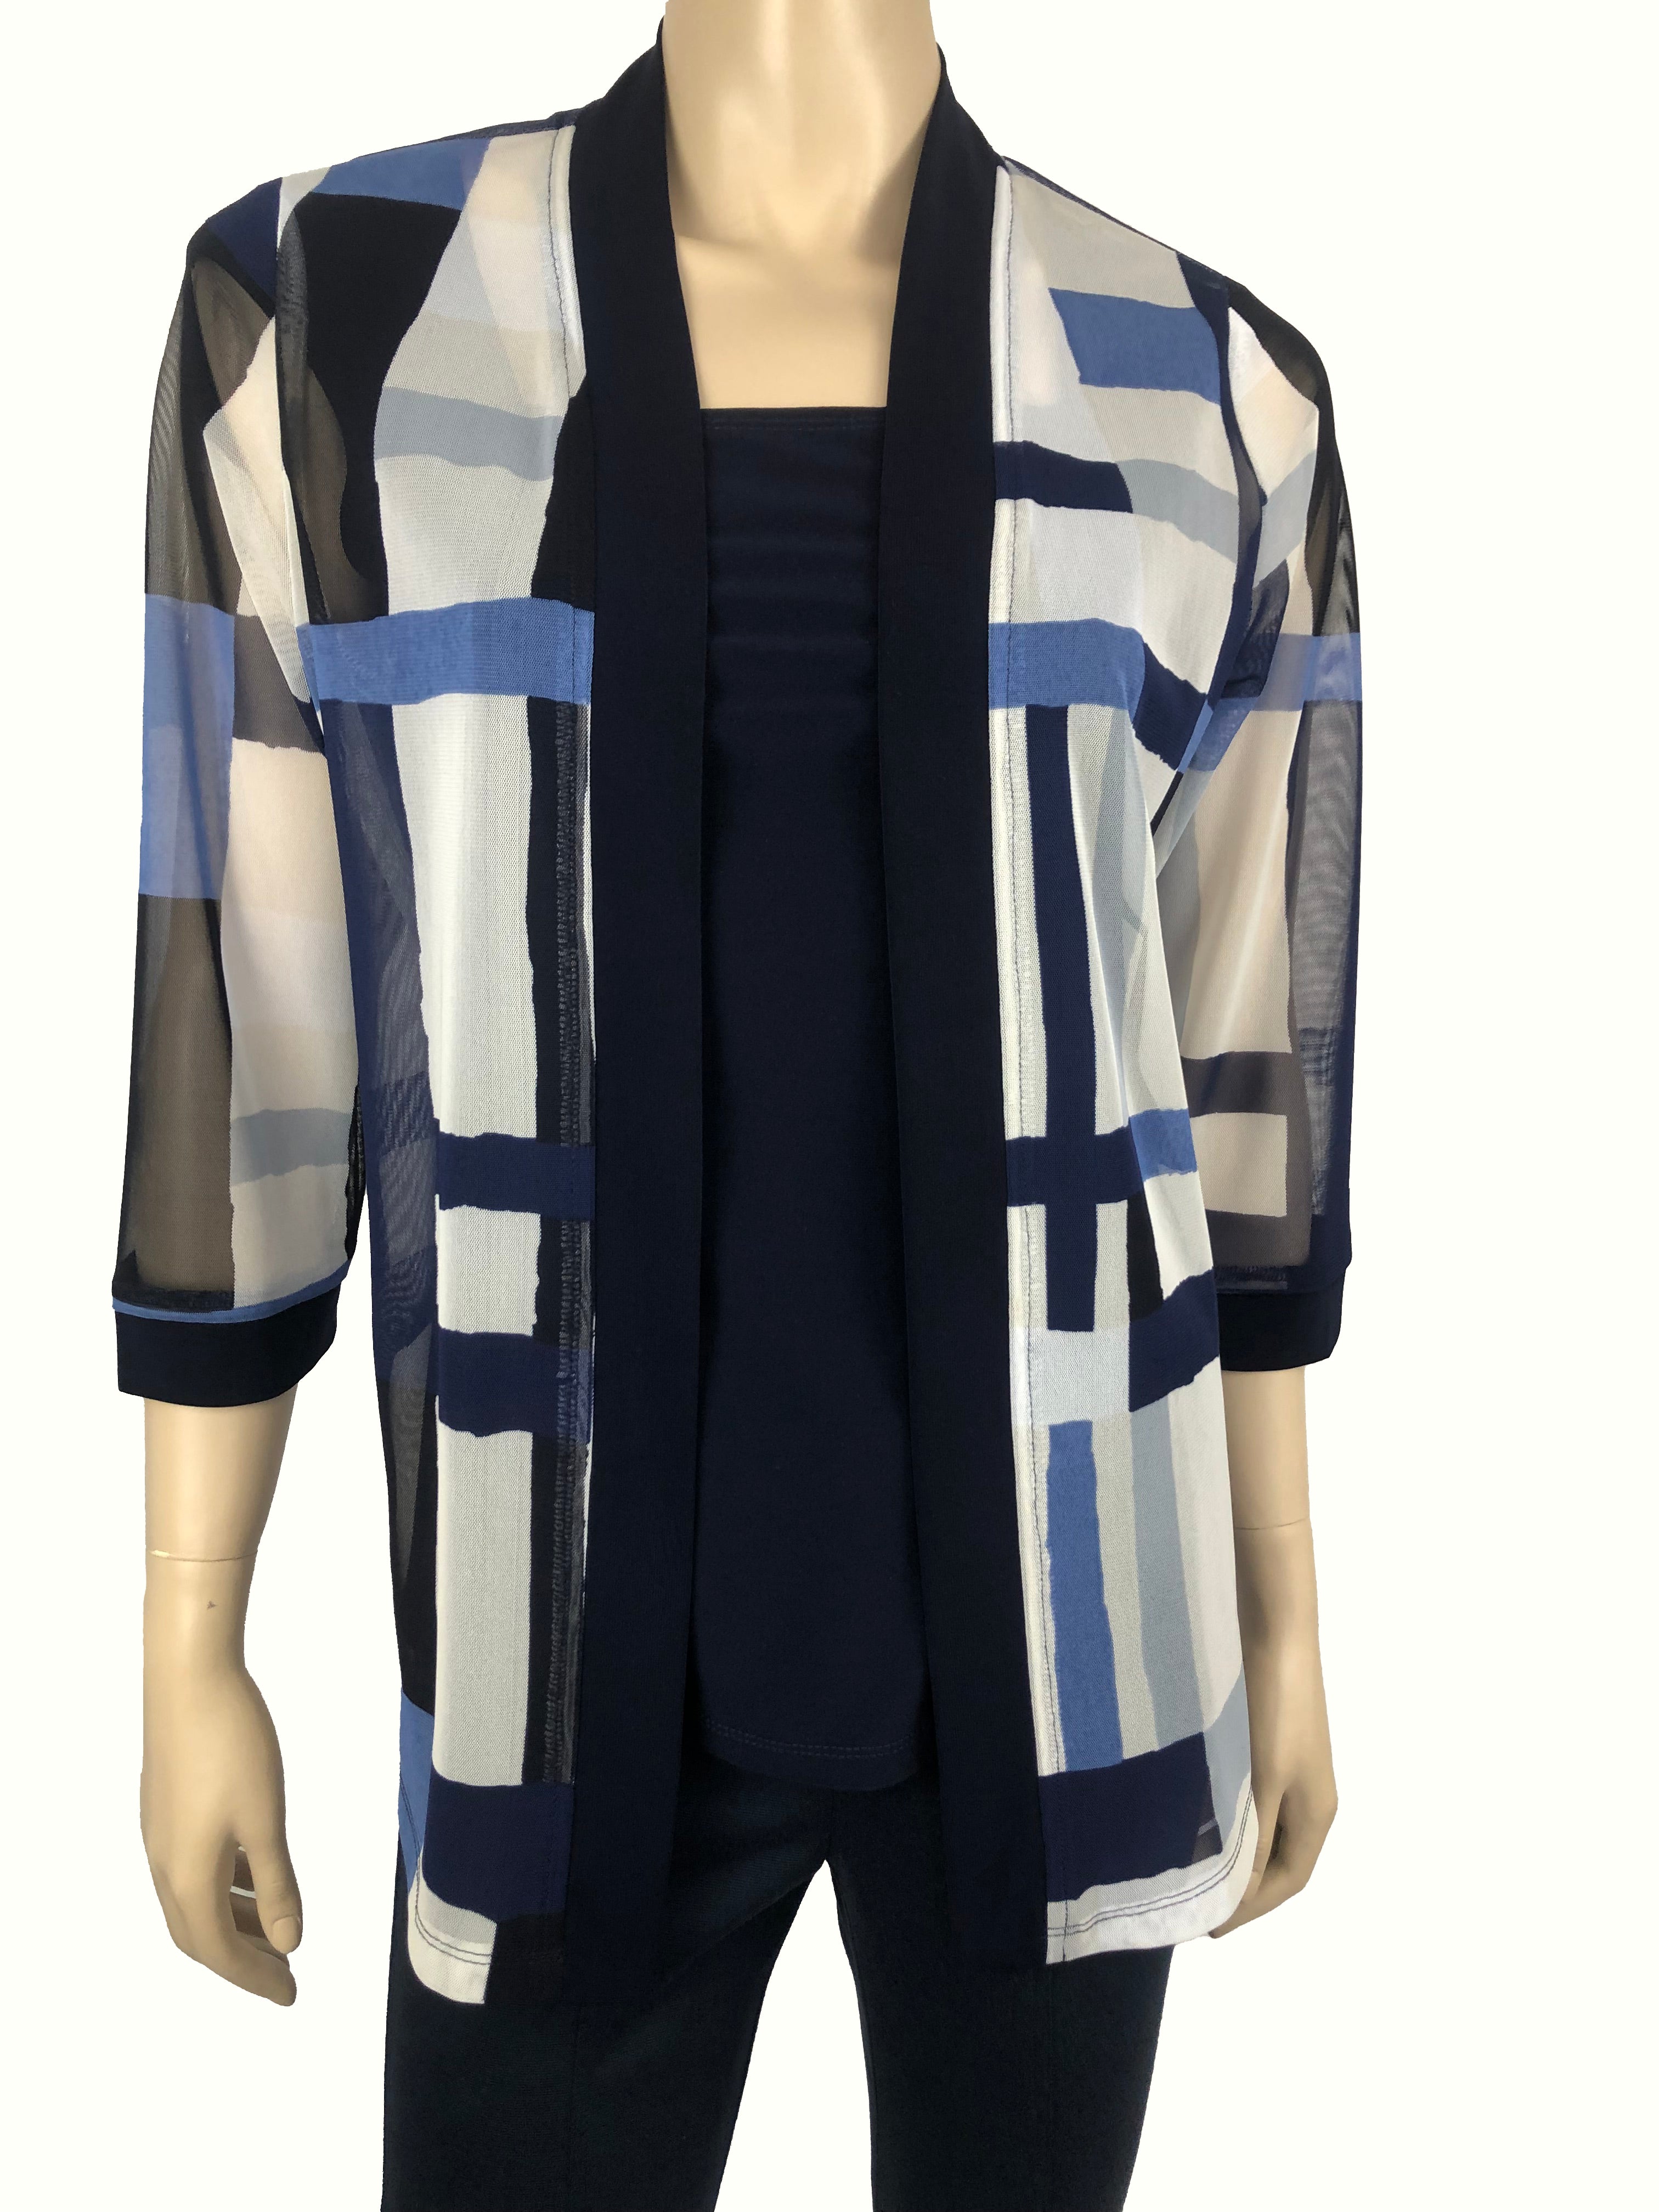 Women's Cardigan Navy Geo Print On Sale Now Made in Canada XLARGE Sizes - Yvonne Marie - Yvonne Marie